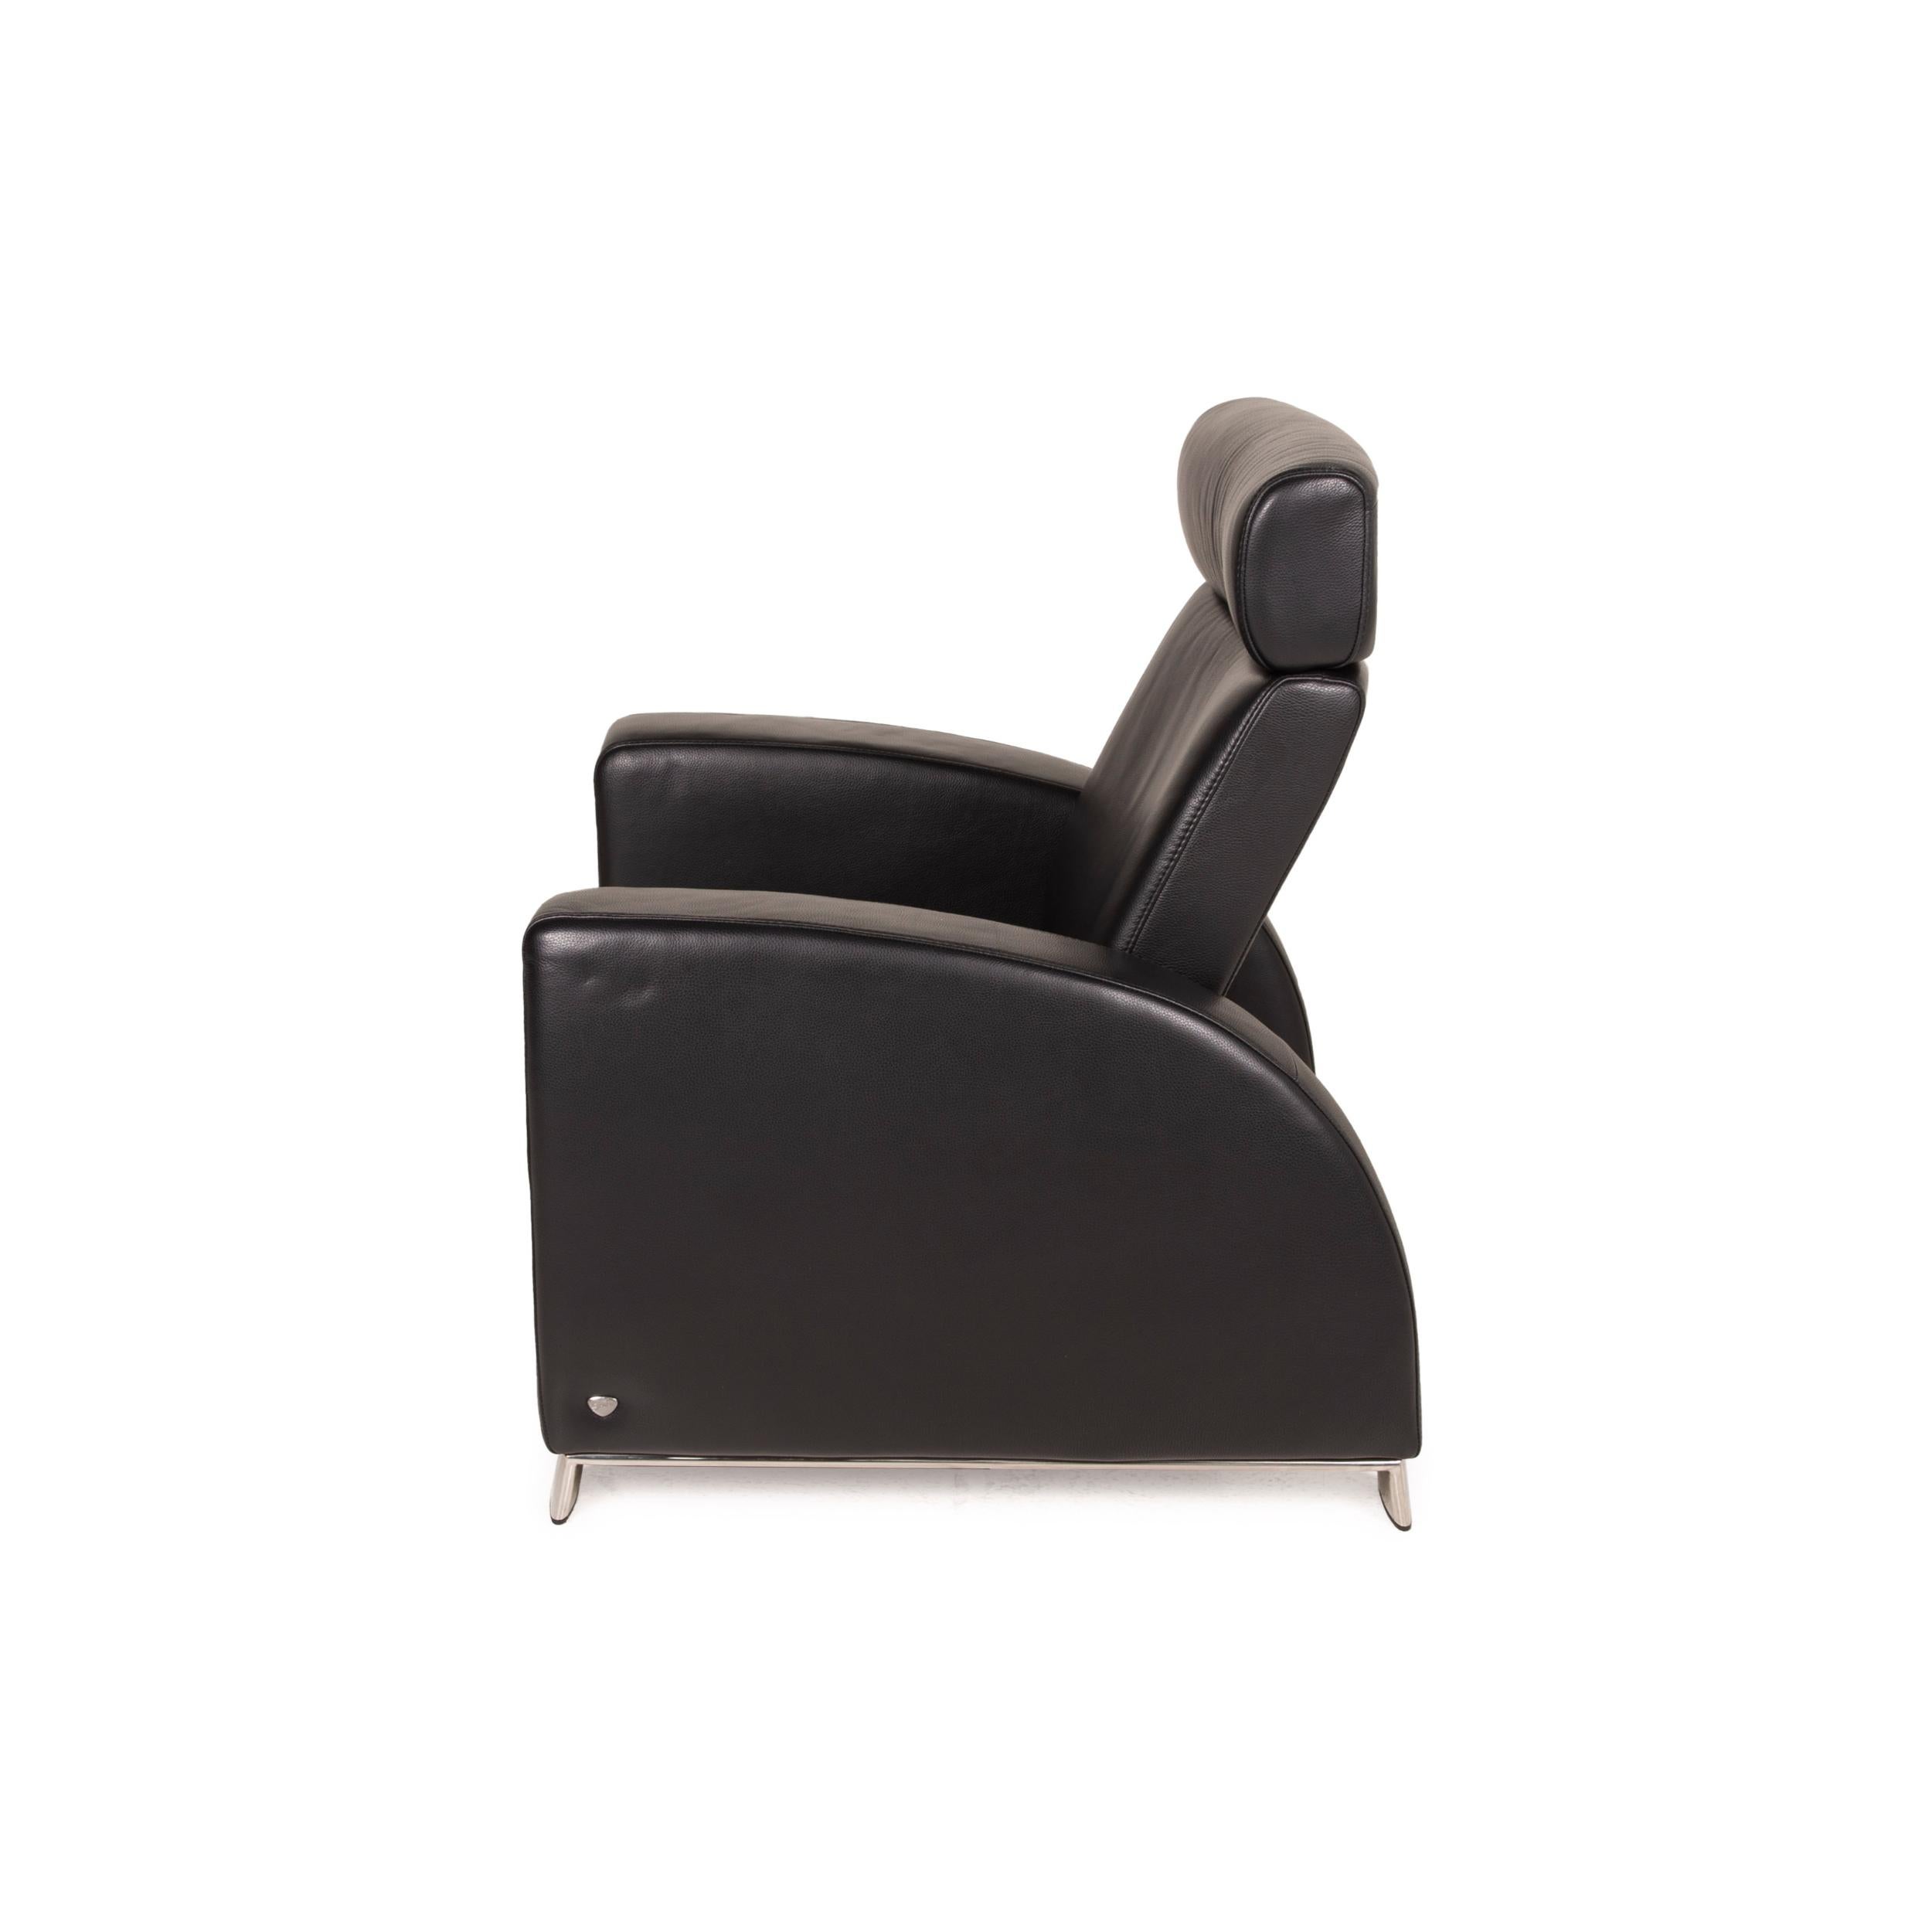 Stressless Arion Leather Armchair Black Relax Function For Sale 3